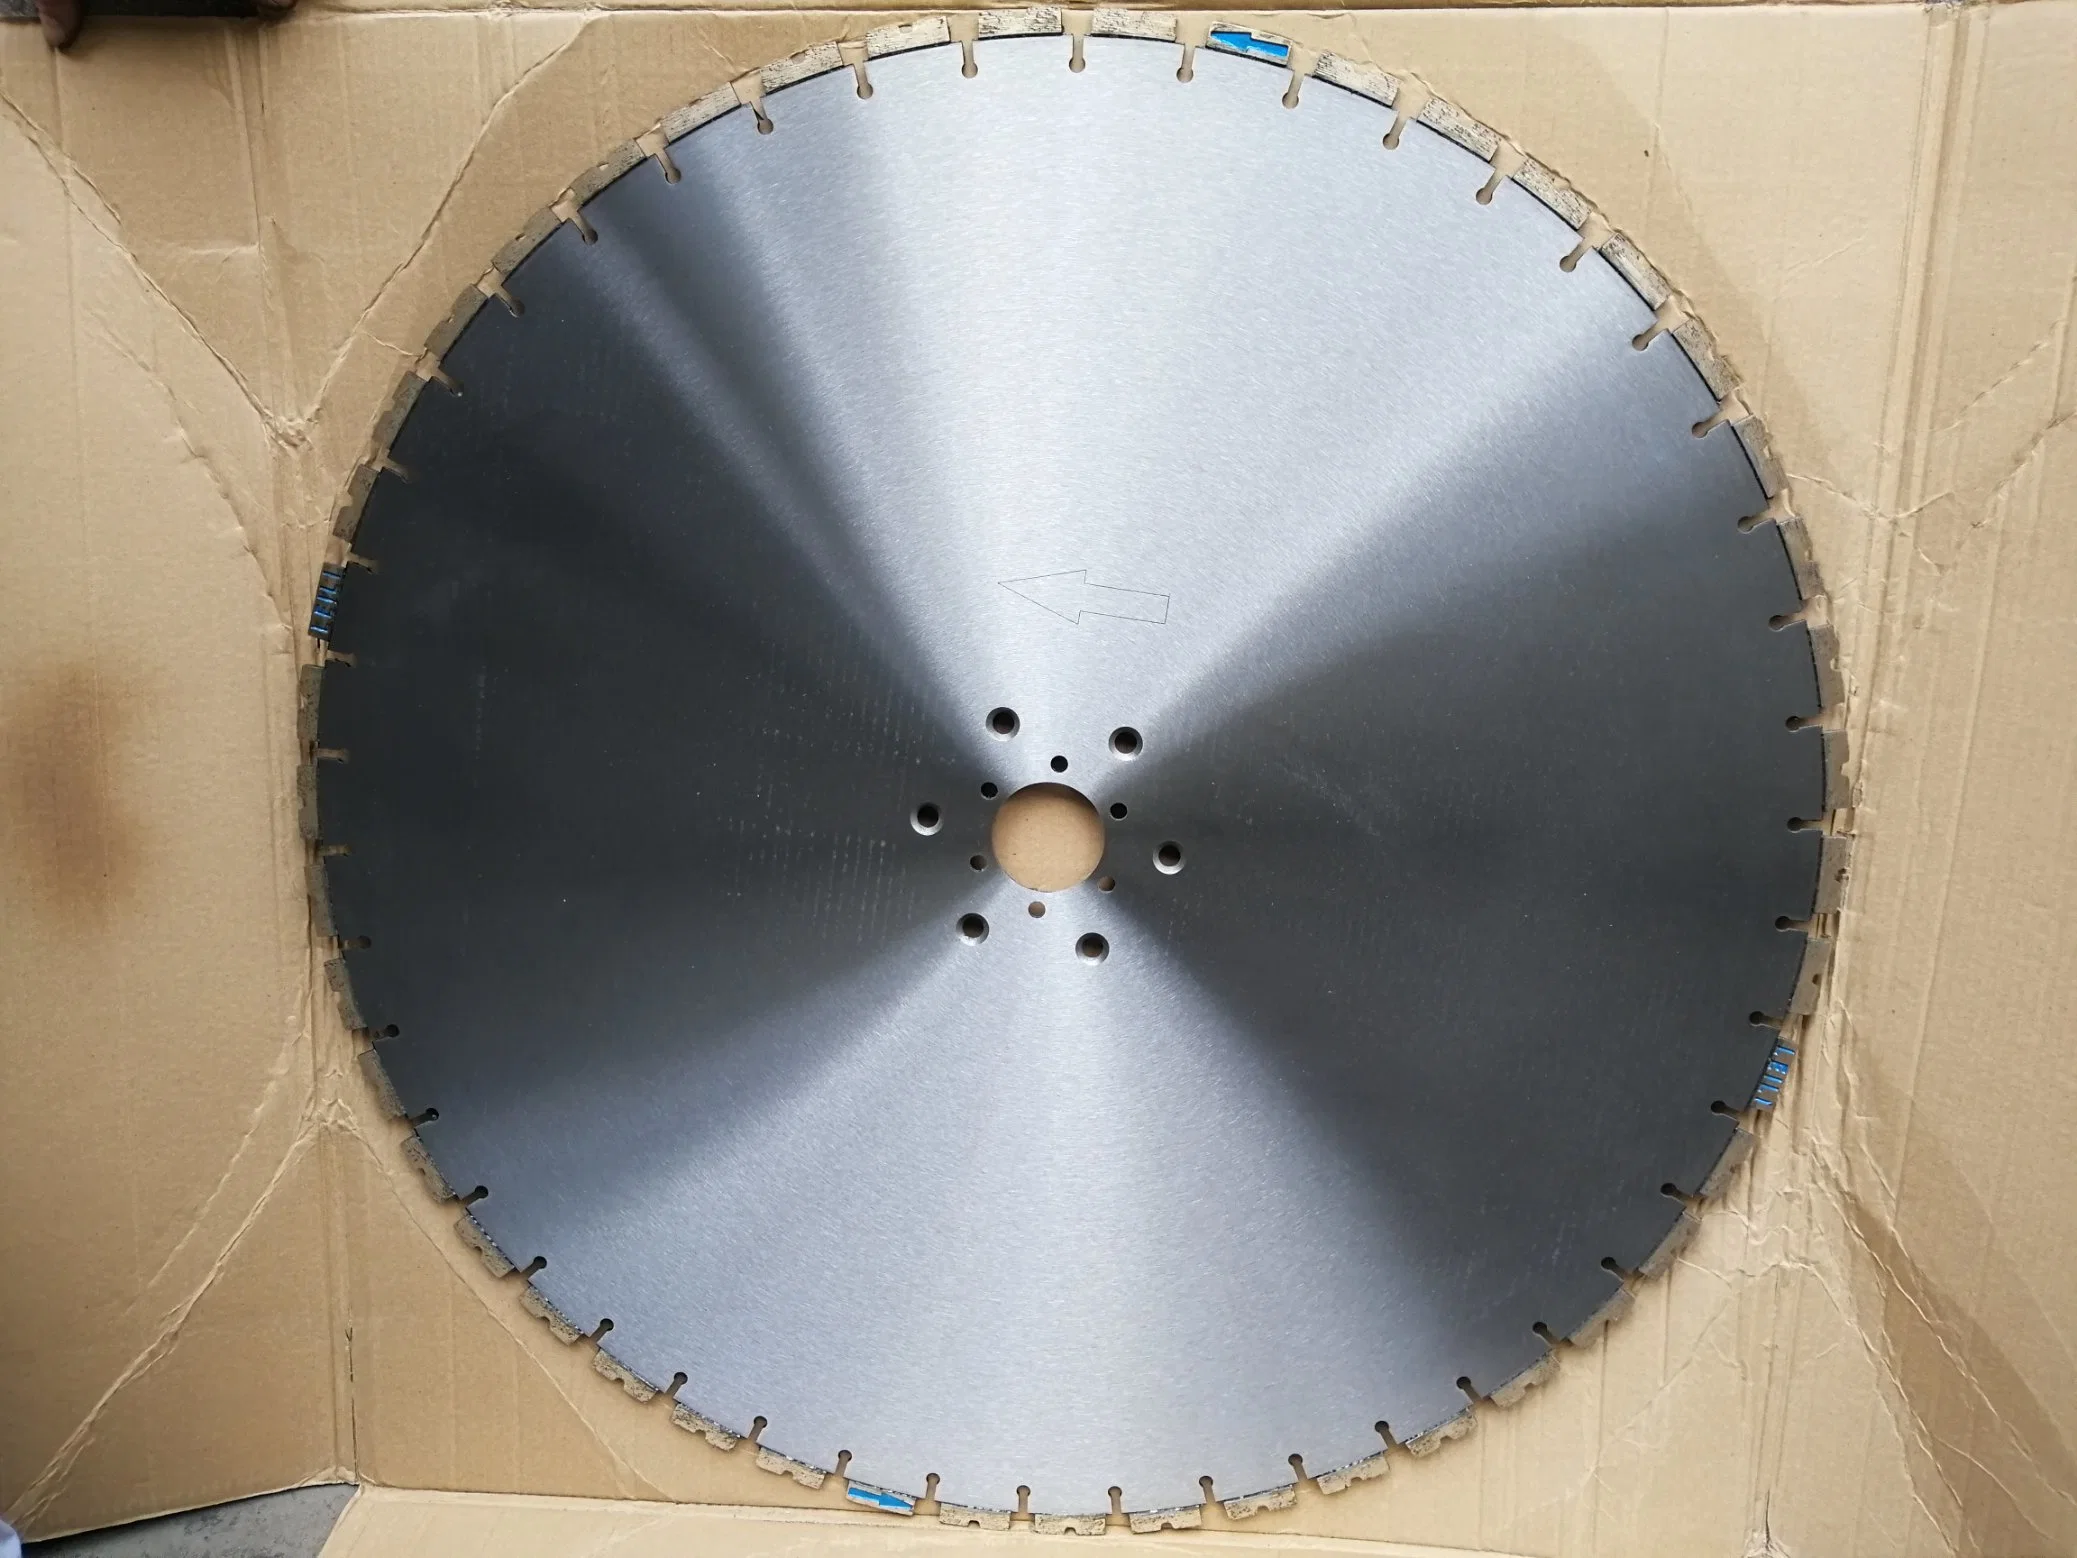 Leili Laser Welded Segment Wall Saw Blade for Concrete/ Reinforced Concrete Wall Demolition.